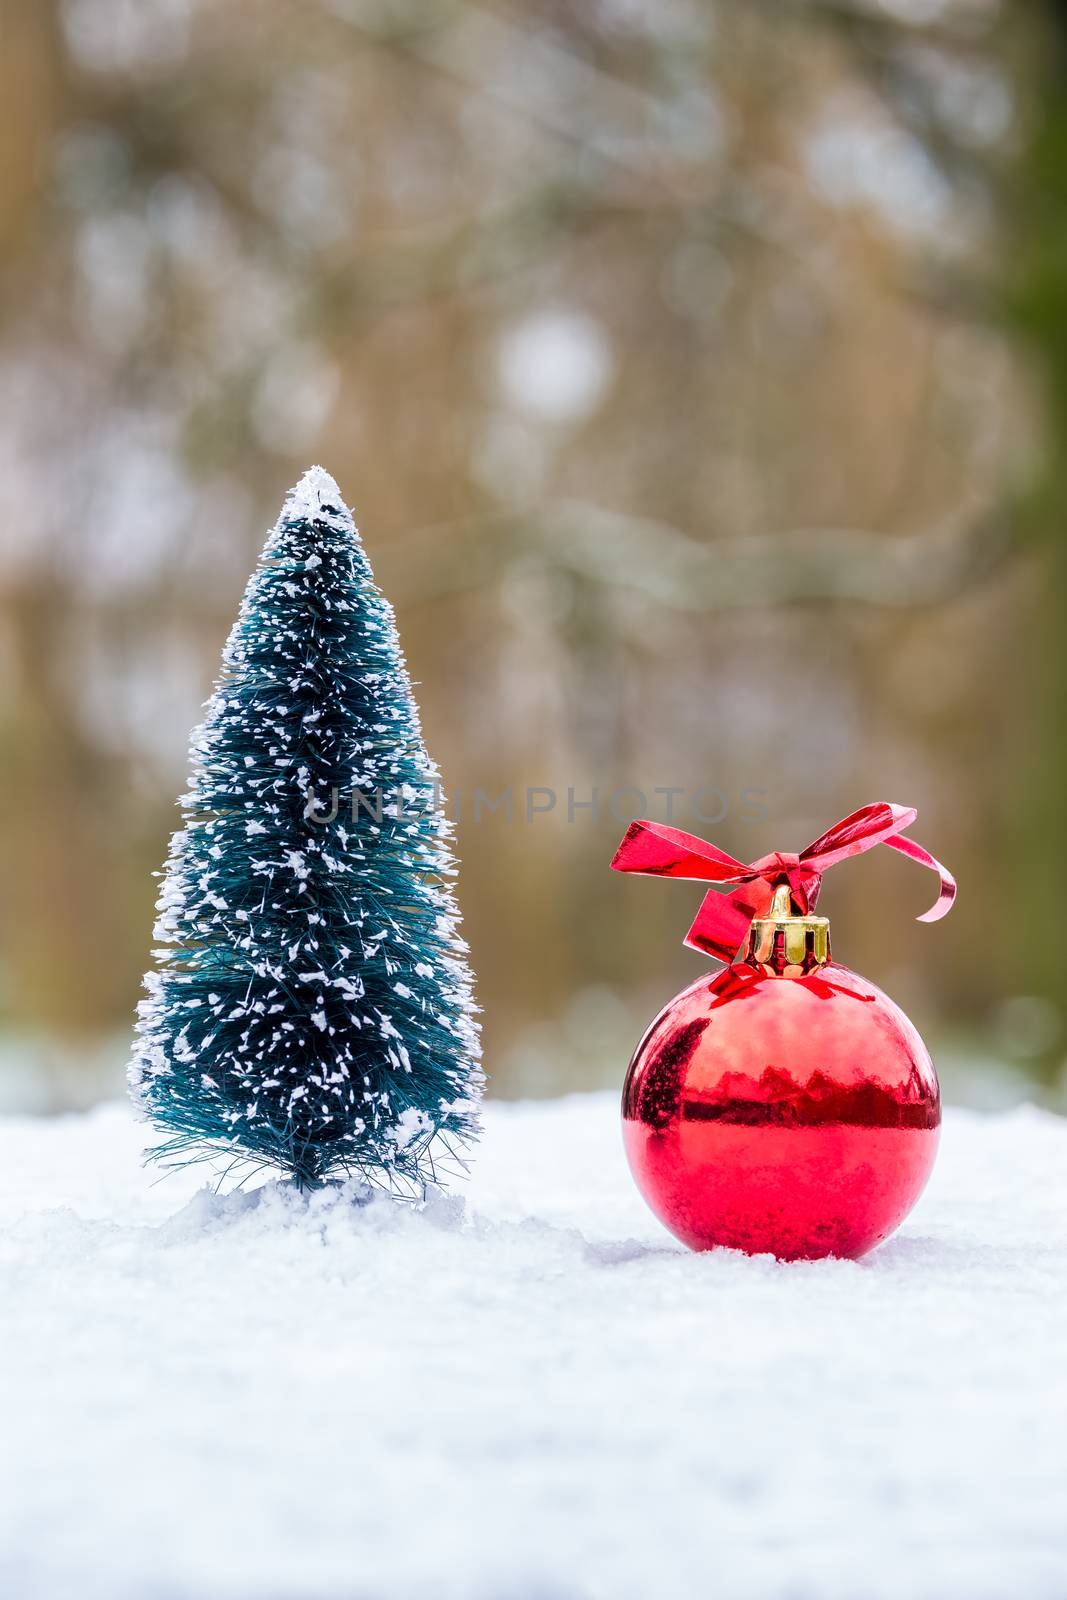 Little christmas tree with red bauble outdoors in white snow